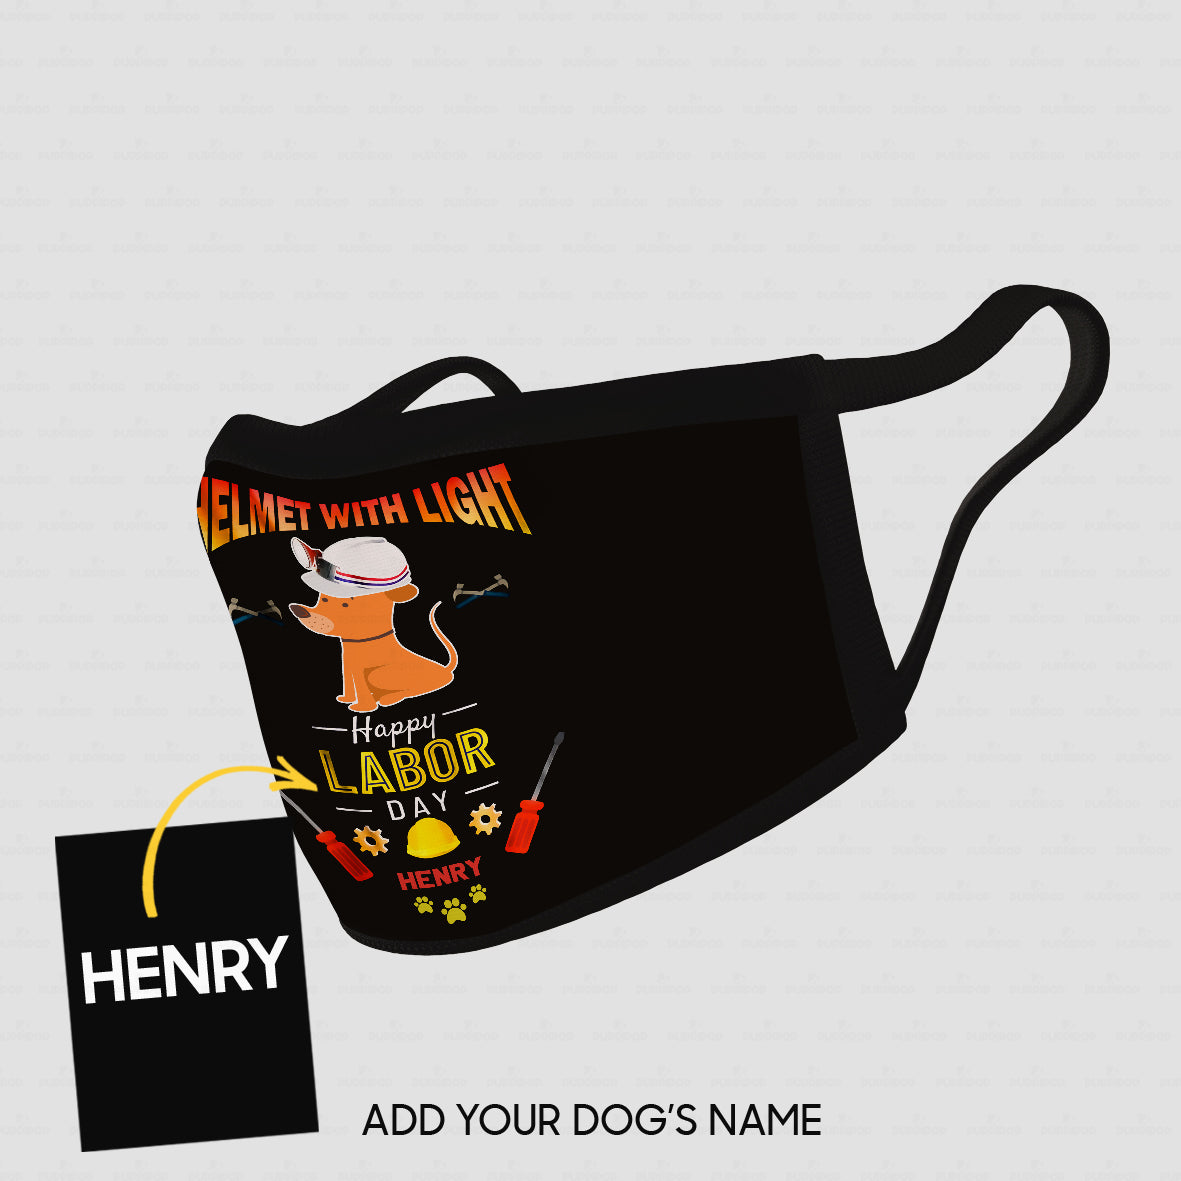 Personalized Dog Gift Idea - Helmet With Light Happy Labor Day For Dog Lovers - Cloth Mask